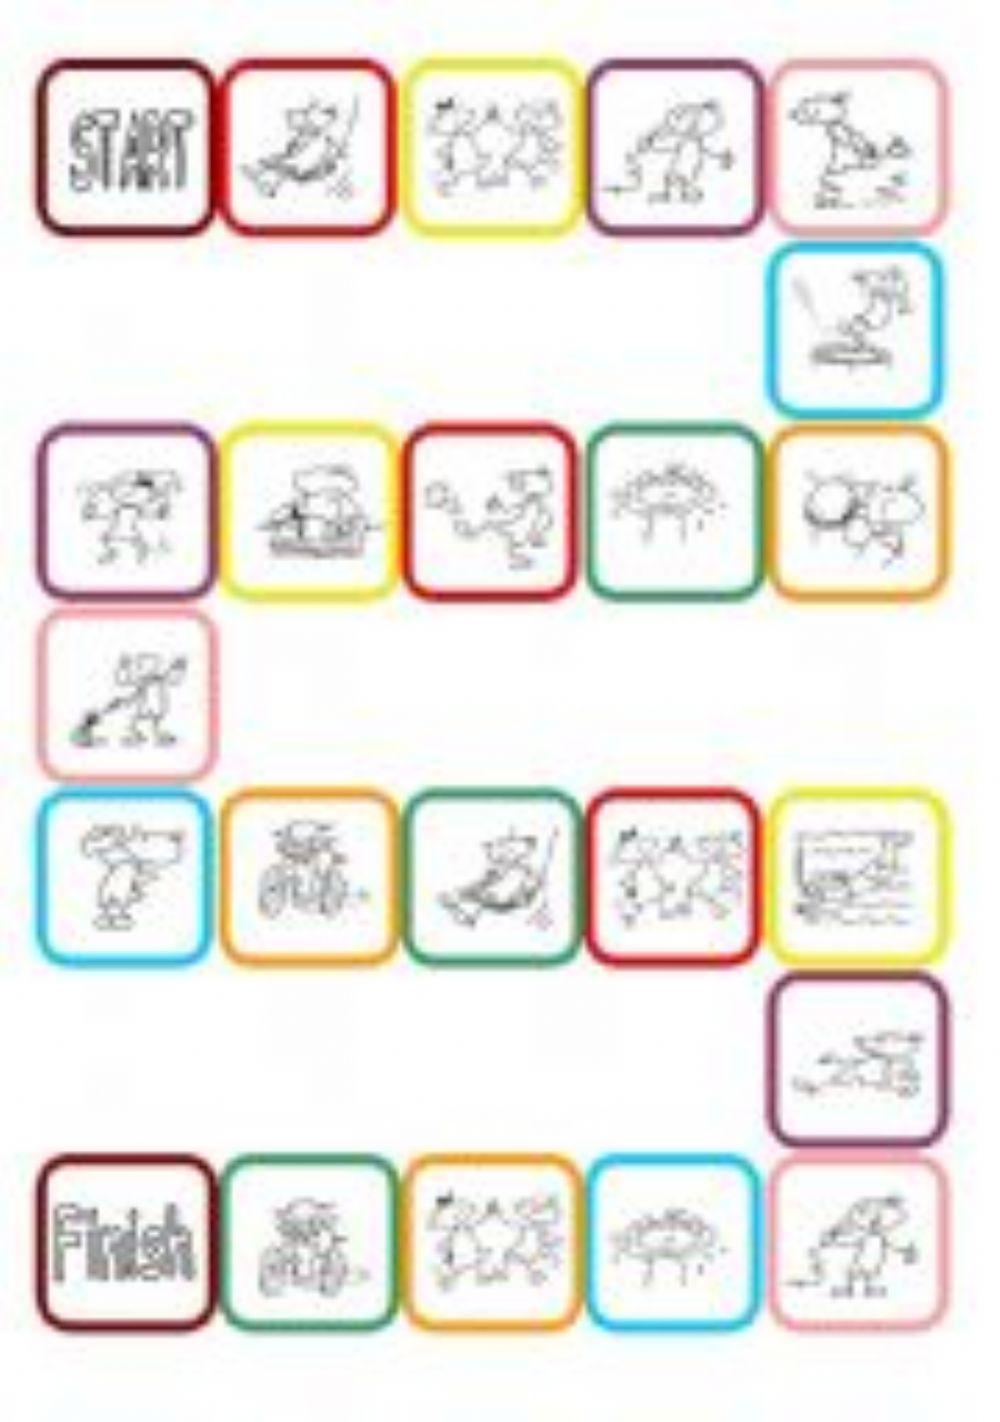 Action Verbs Dice Game